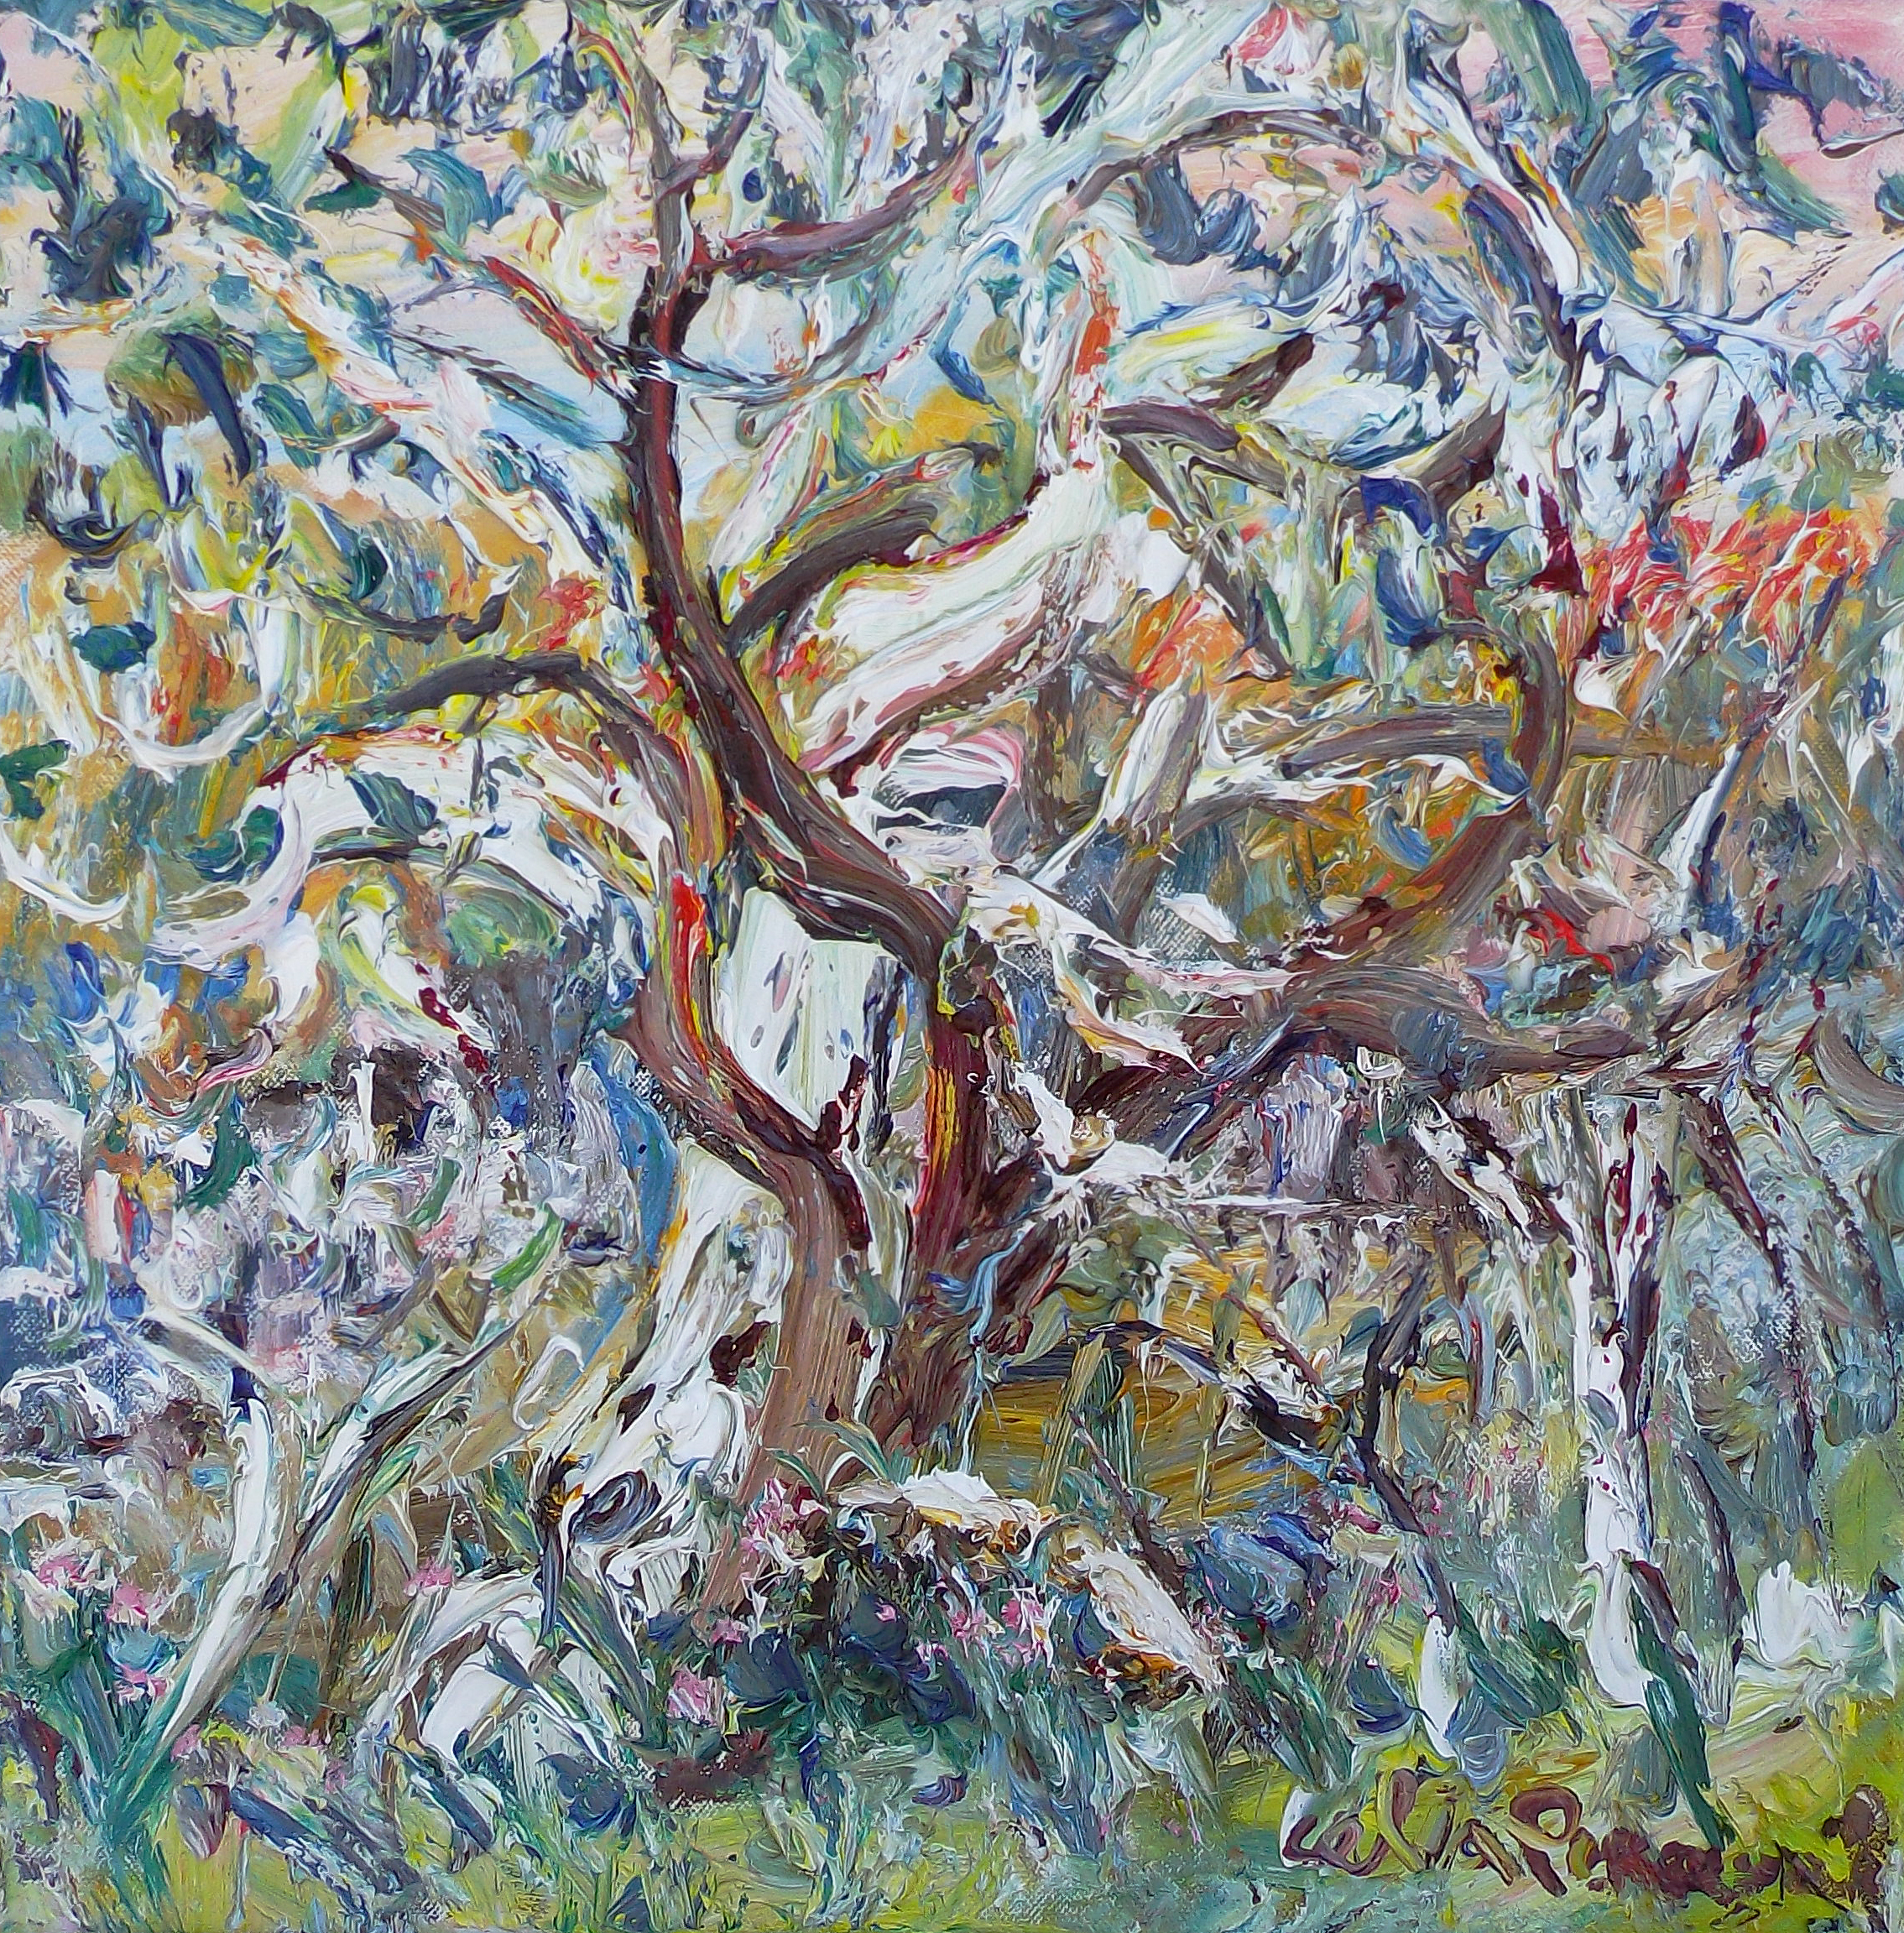 Celia Perceval 'Sunlight in the gums after the rain' oil on canvas 40 x 40cm $4,900